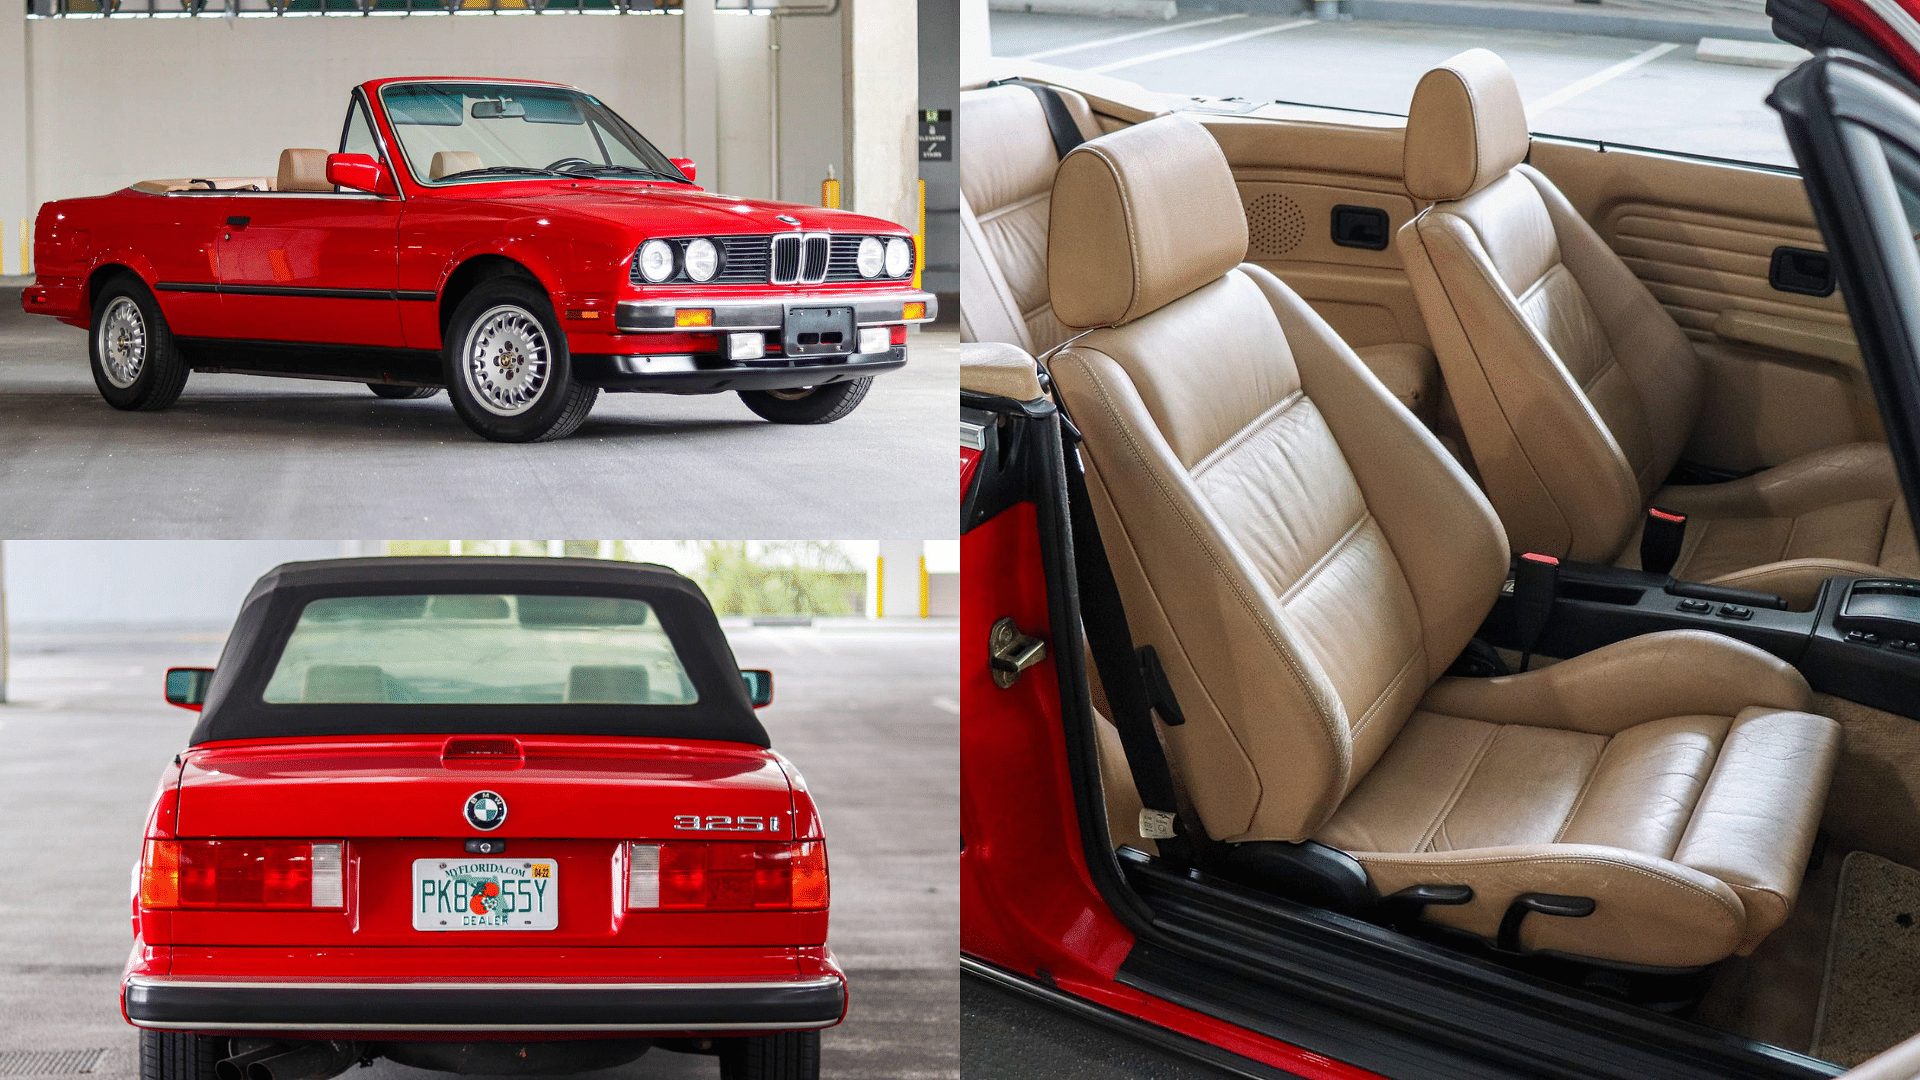 1989 BMW 3-Series (E30) Convertible - side and rear view, interior